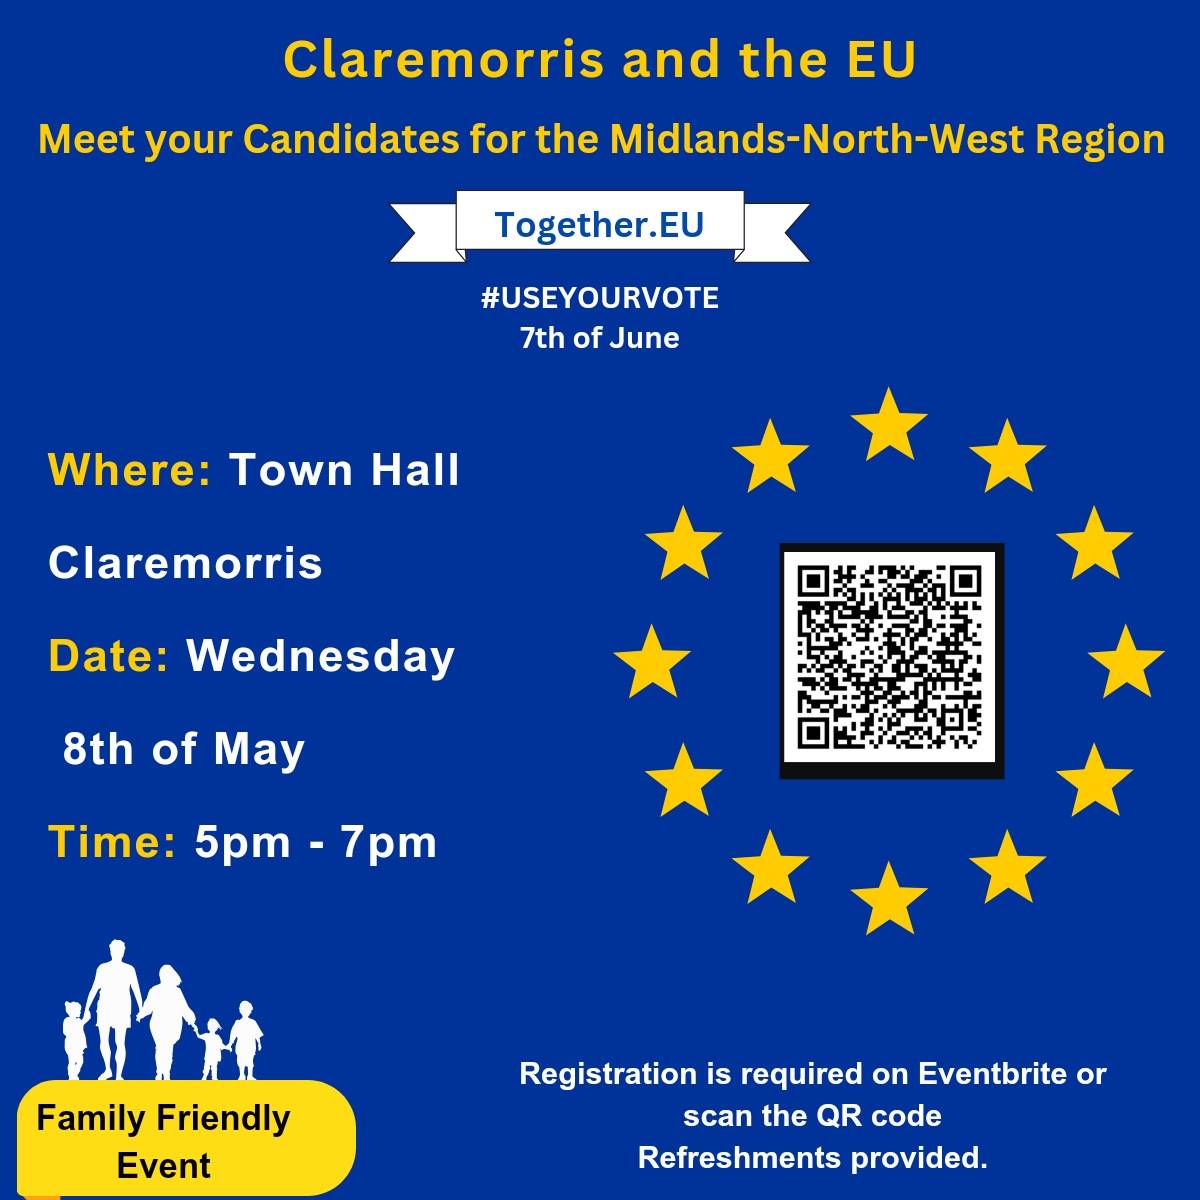 🇪🇺 Do you want to find out how the EU supports Claremorris? 🇮🇪 👇 I'm looking forward to attending this event tomorrow. 🗳It gives you a chance to ask your questions before you vote on June 7th. #UseYourVote #EU